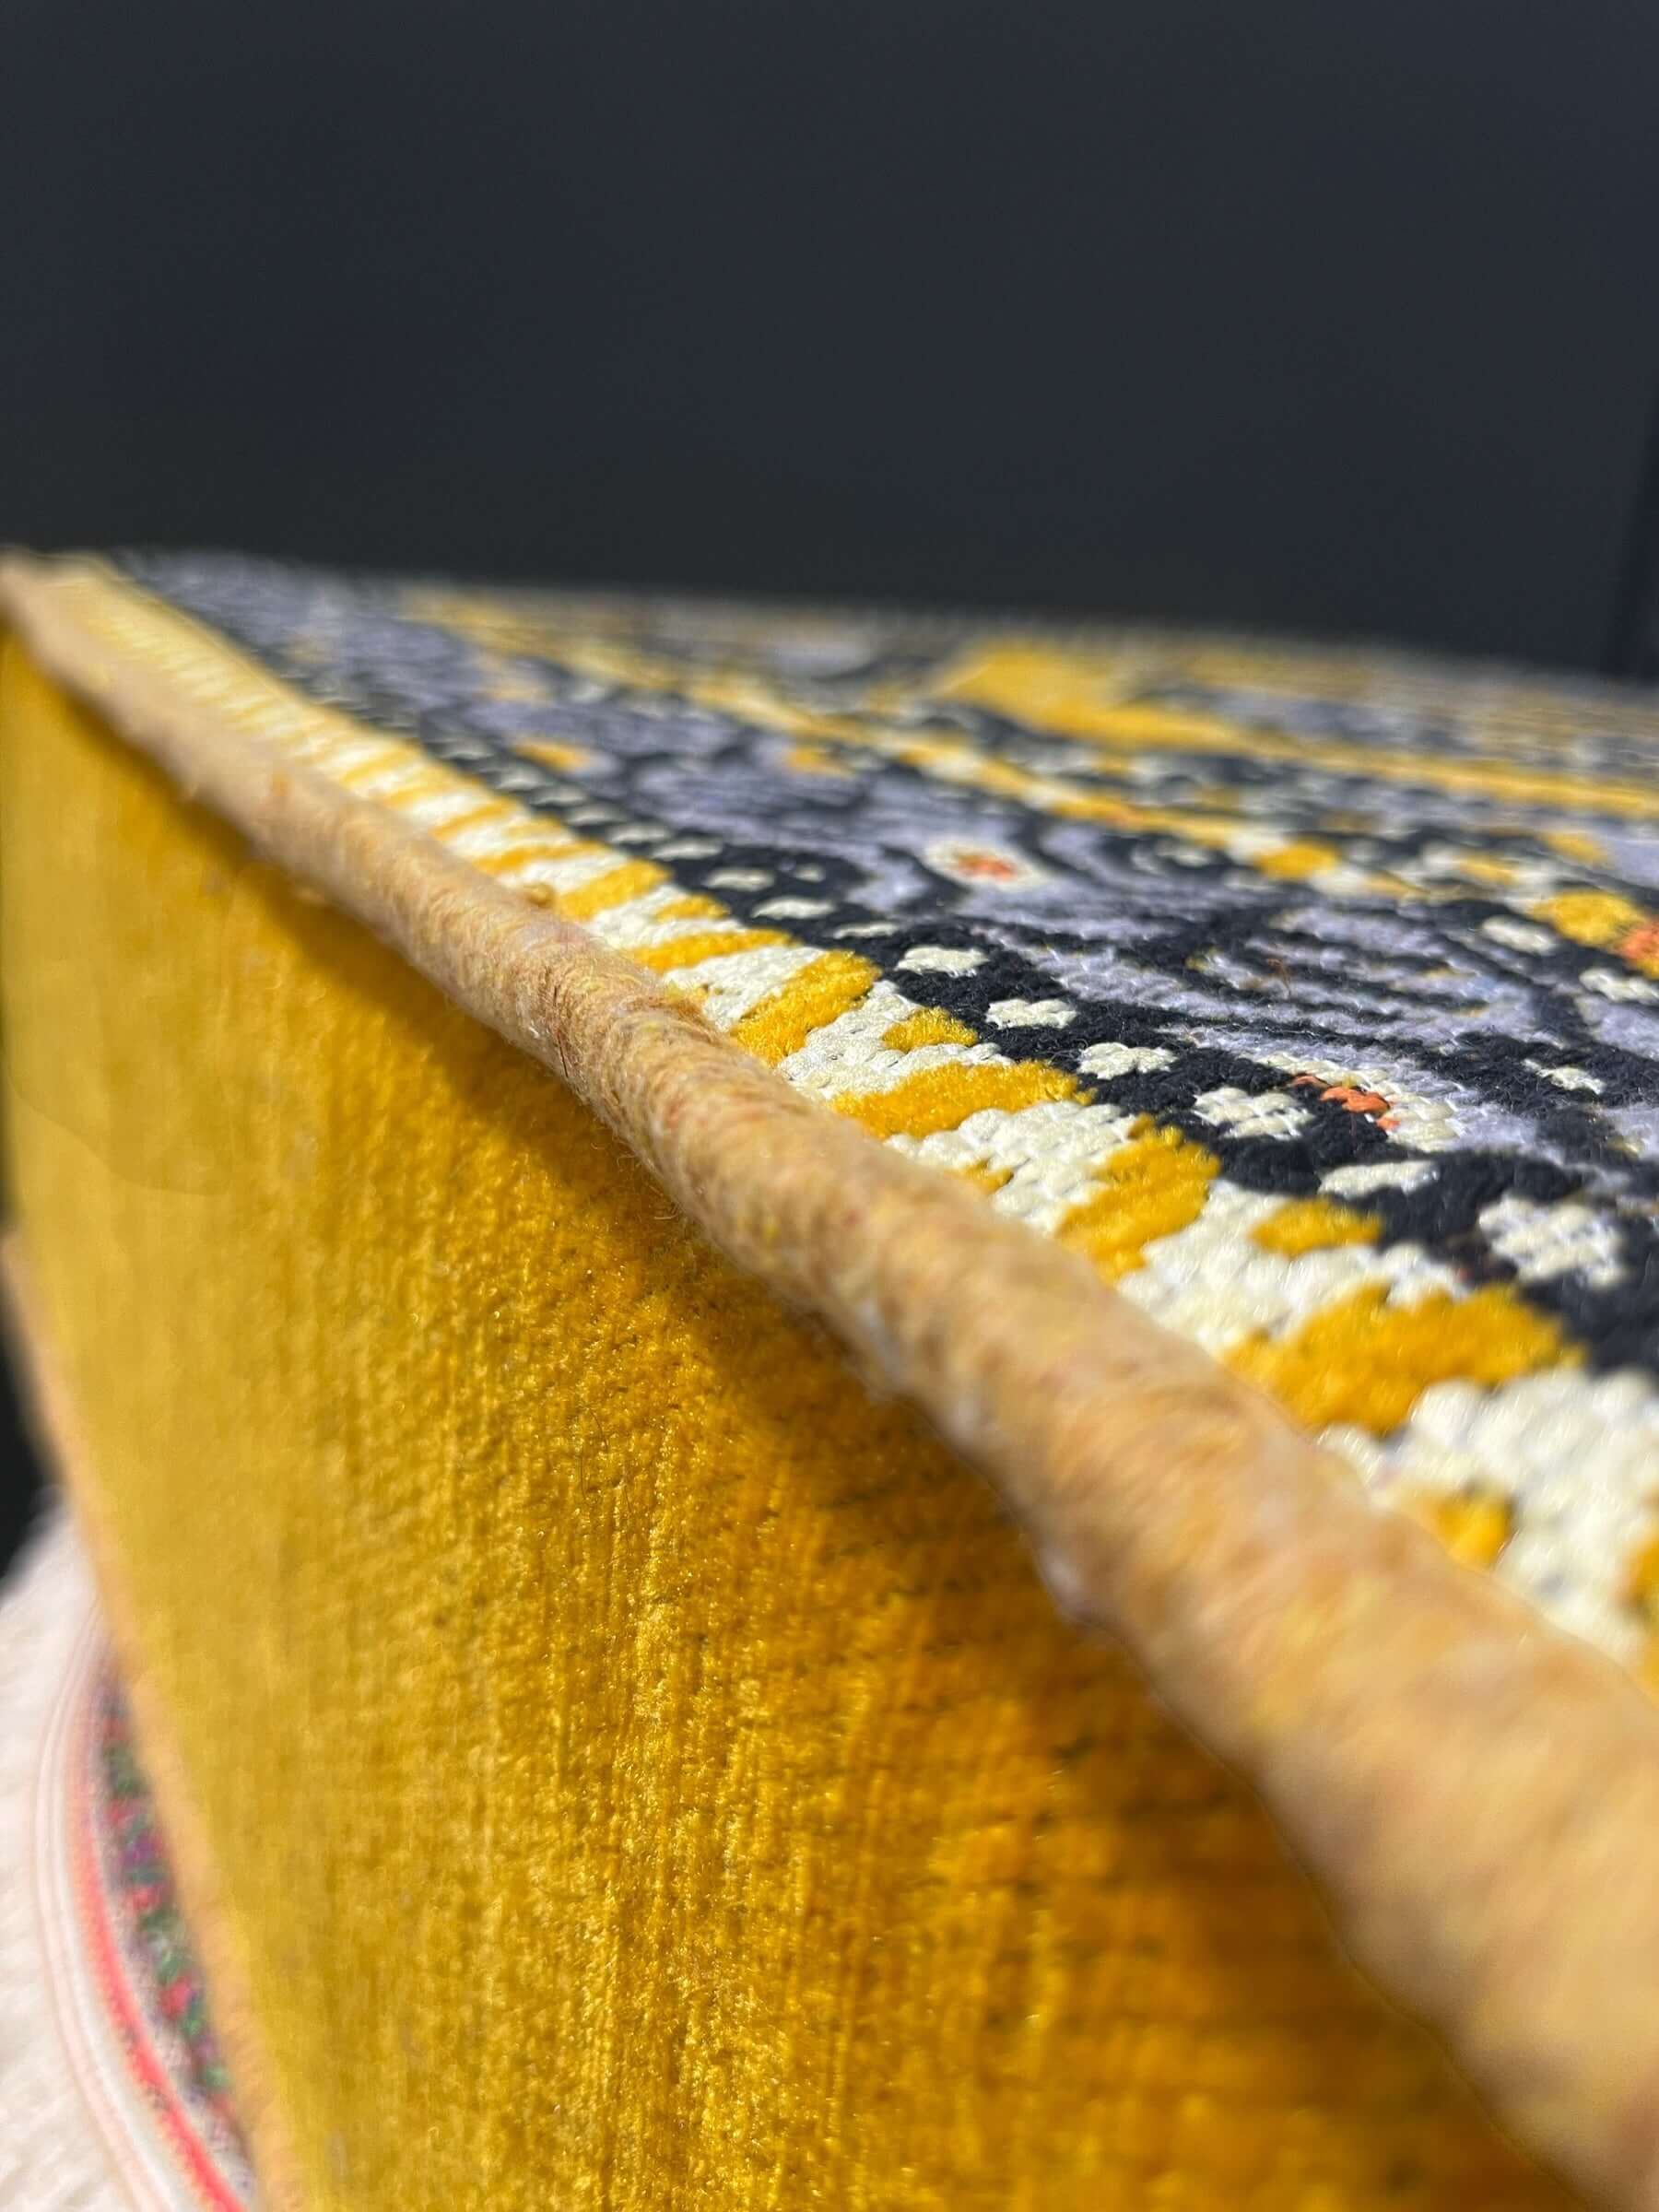 60x60 Cushion Table (Yellow)This 60x60 cushion table will bring an elegant, luxurious look to your home. Crafted from Turkish fabrics with a solid sponge interior, this table is stylish and built to last. It's beautiful designs and traditional look will m